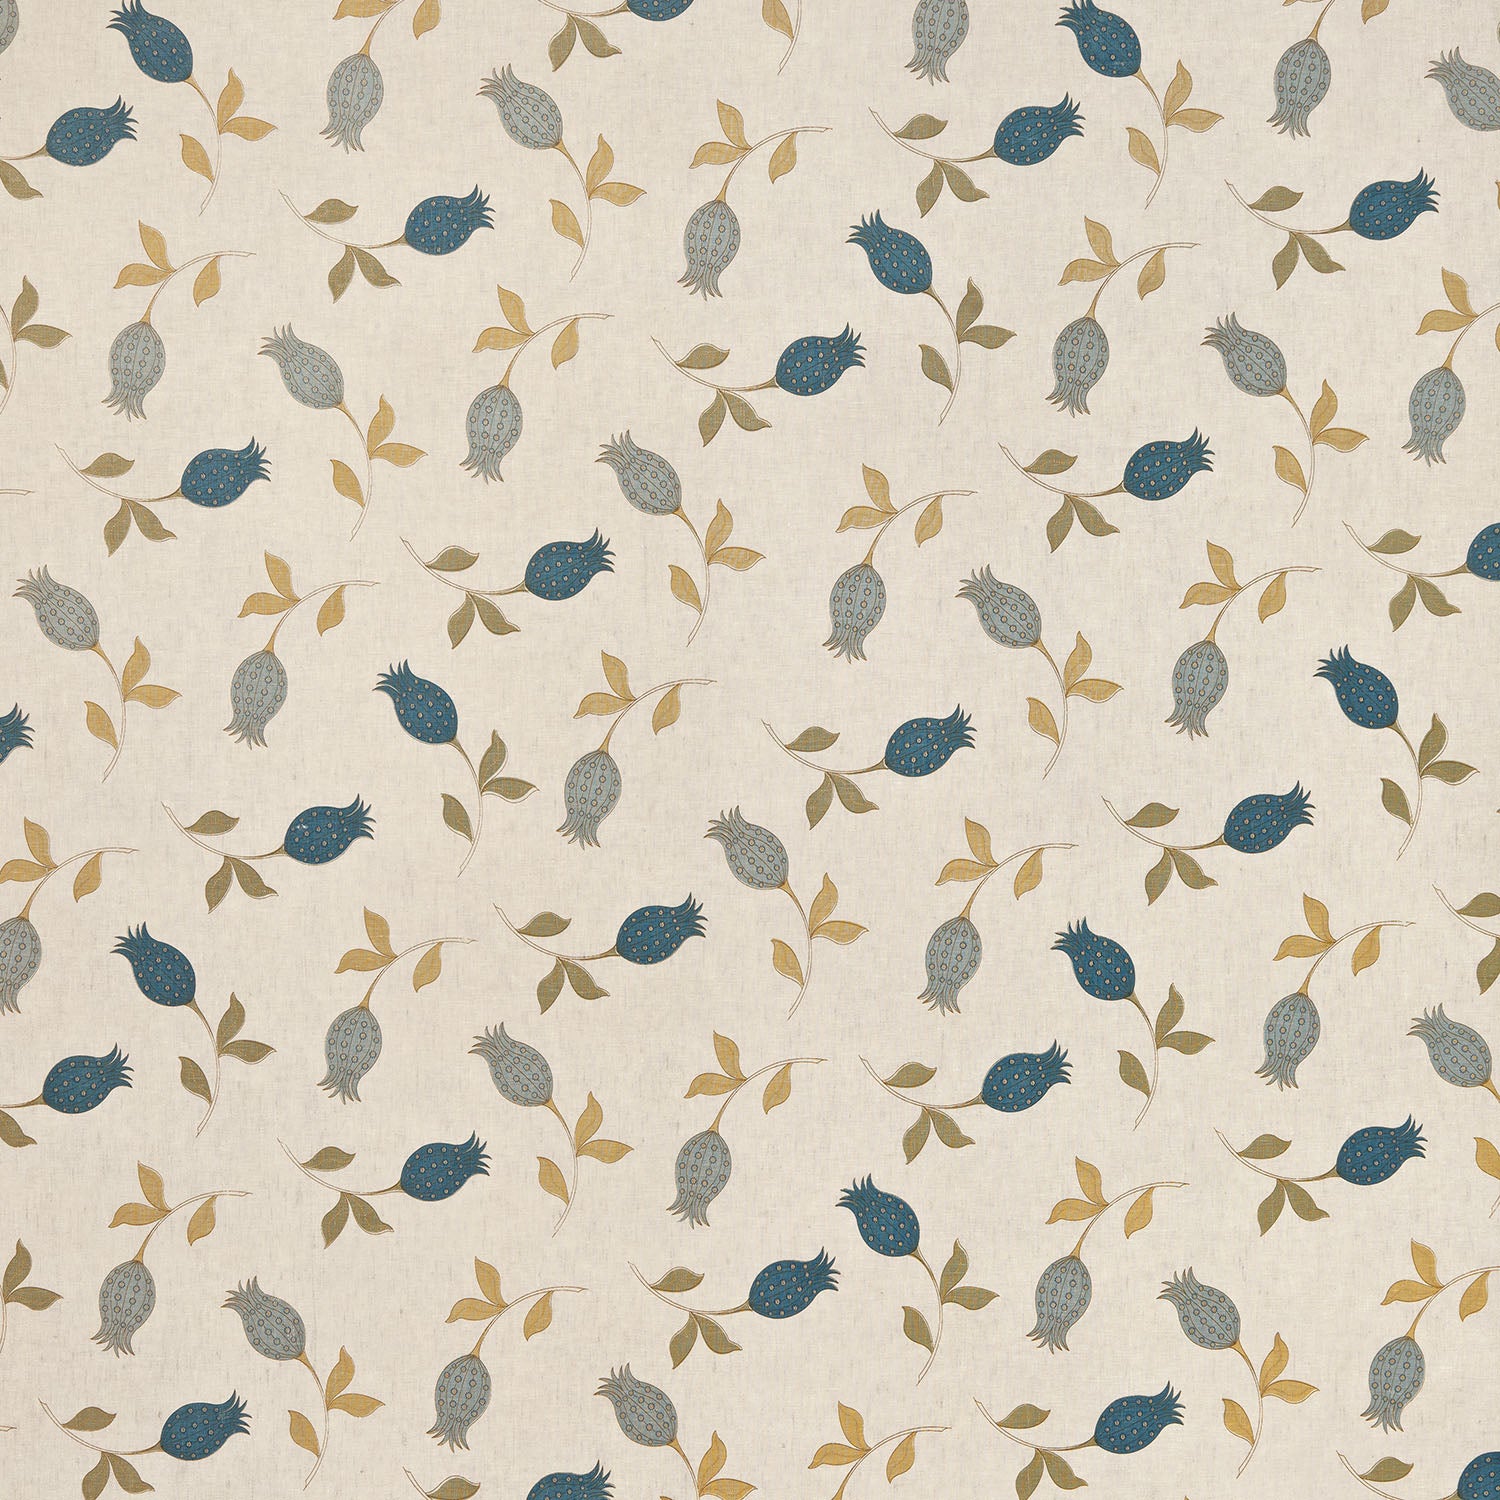 Fabric with a small-scale tulip print in shades of blue and tan on a cream field.